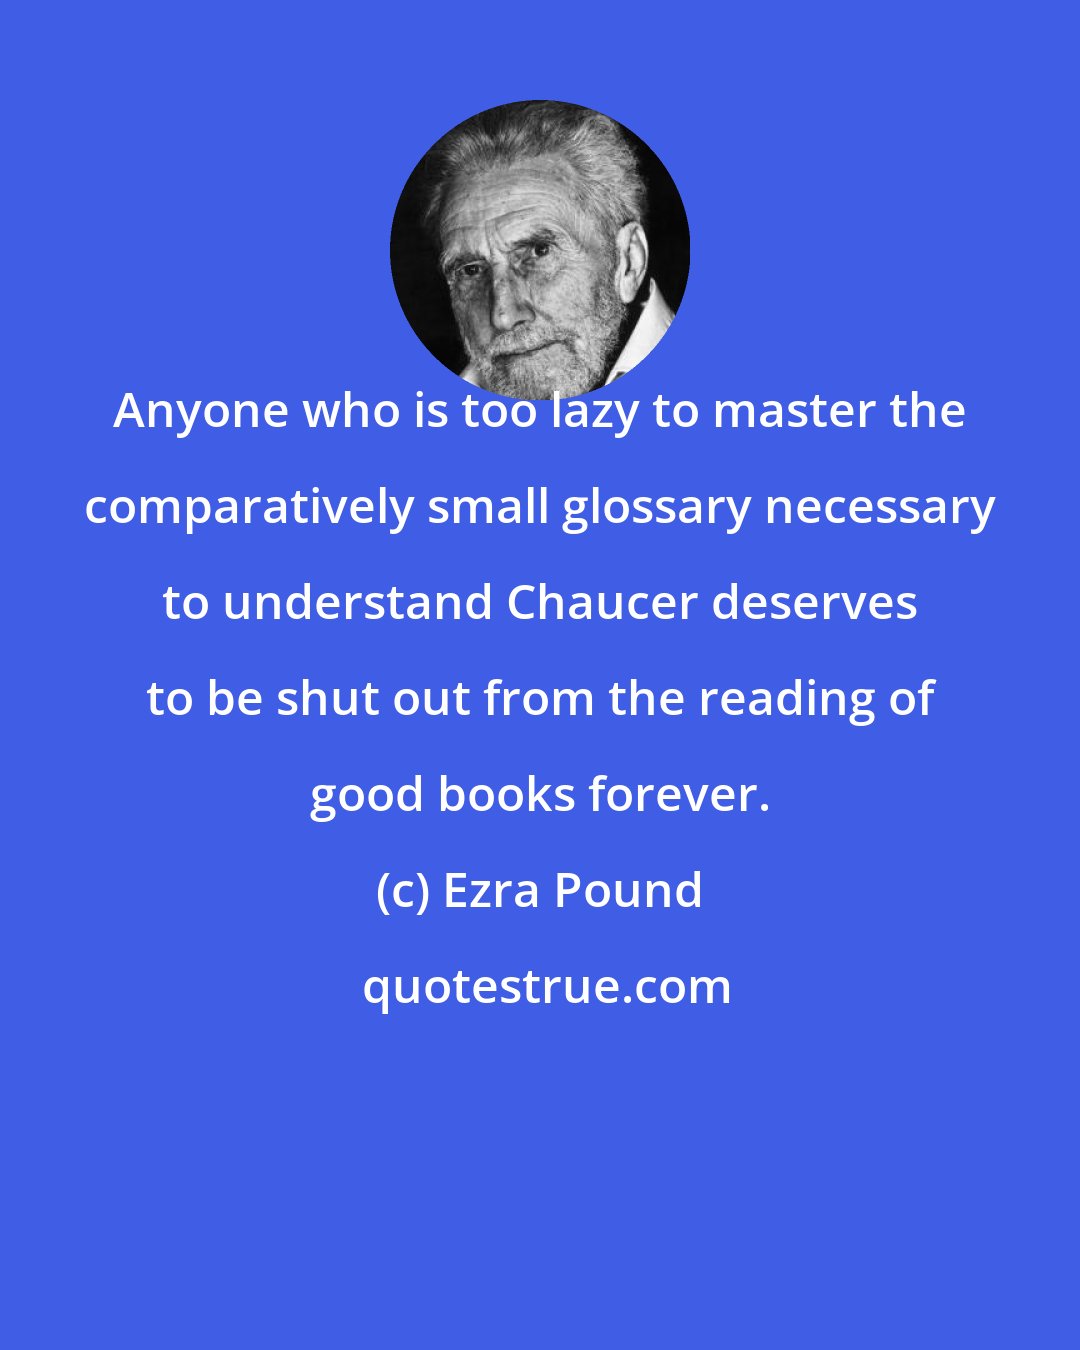 Ezra Pound: Anyone who is too lazy to master the comparatively small glossary necessary to understand Chaucer deserves to be shut out from the reading of good books forever.